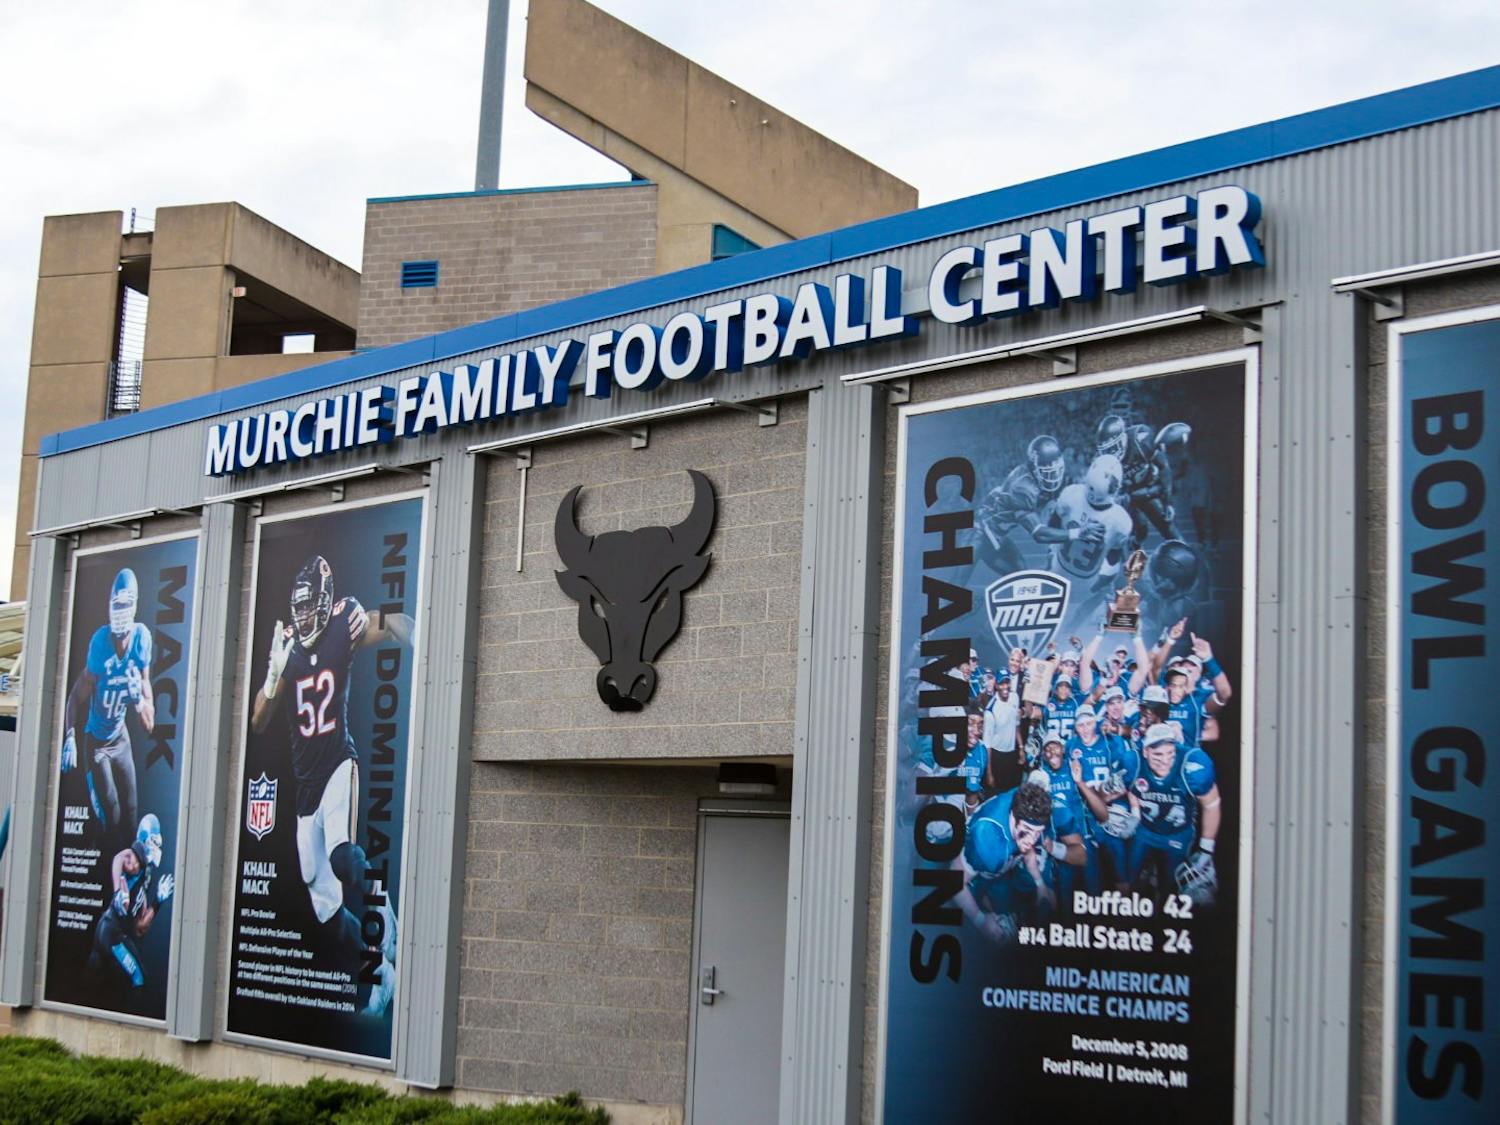 The Murchie Family Football Center is home to coach’s offices, head coaches suit, and 9 team meeting rooms.